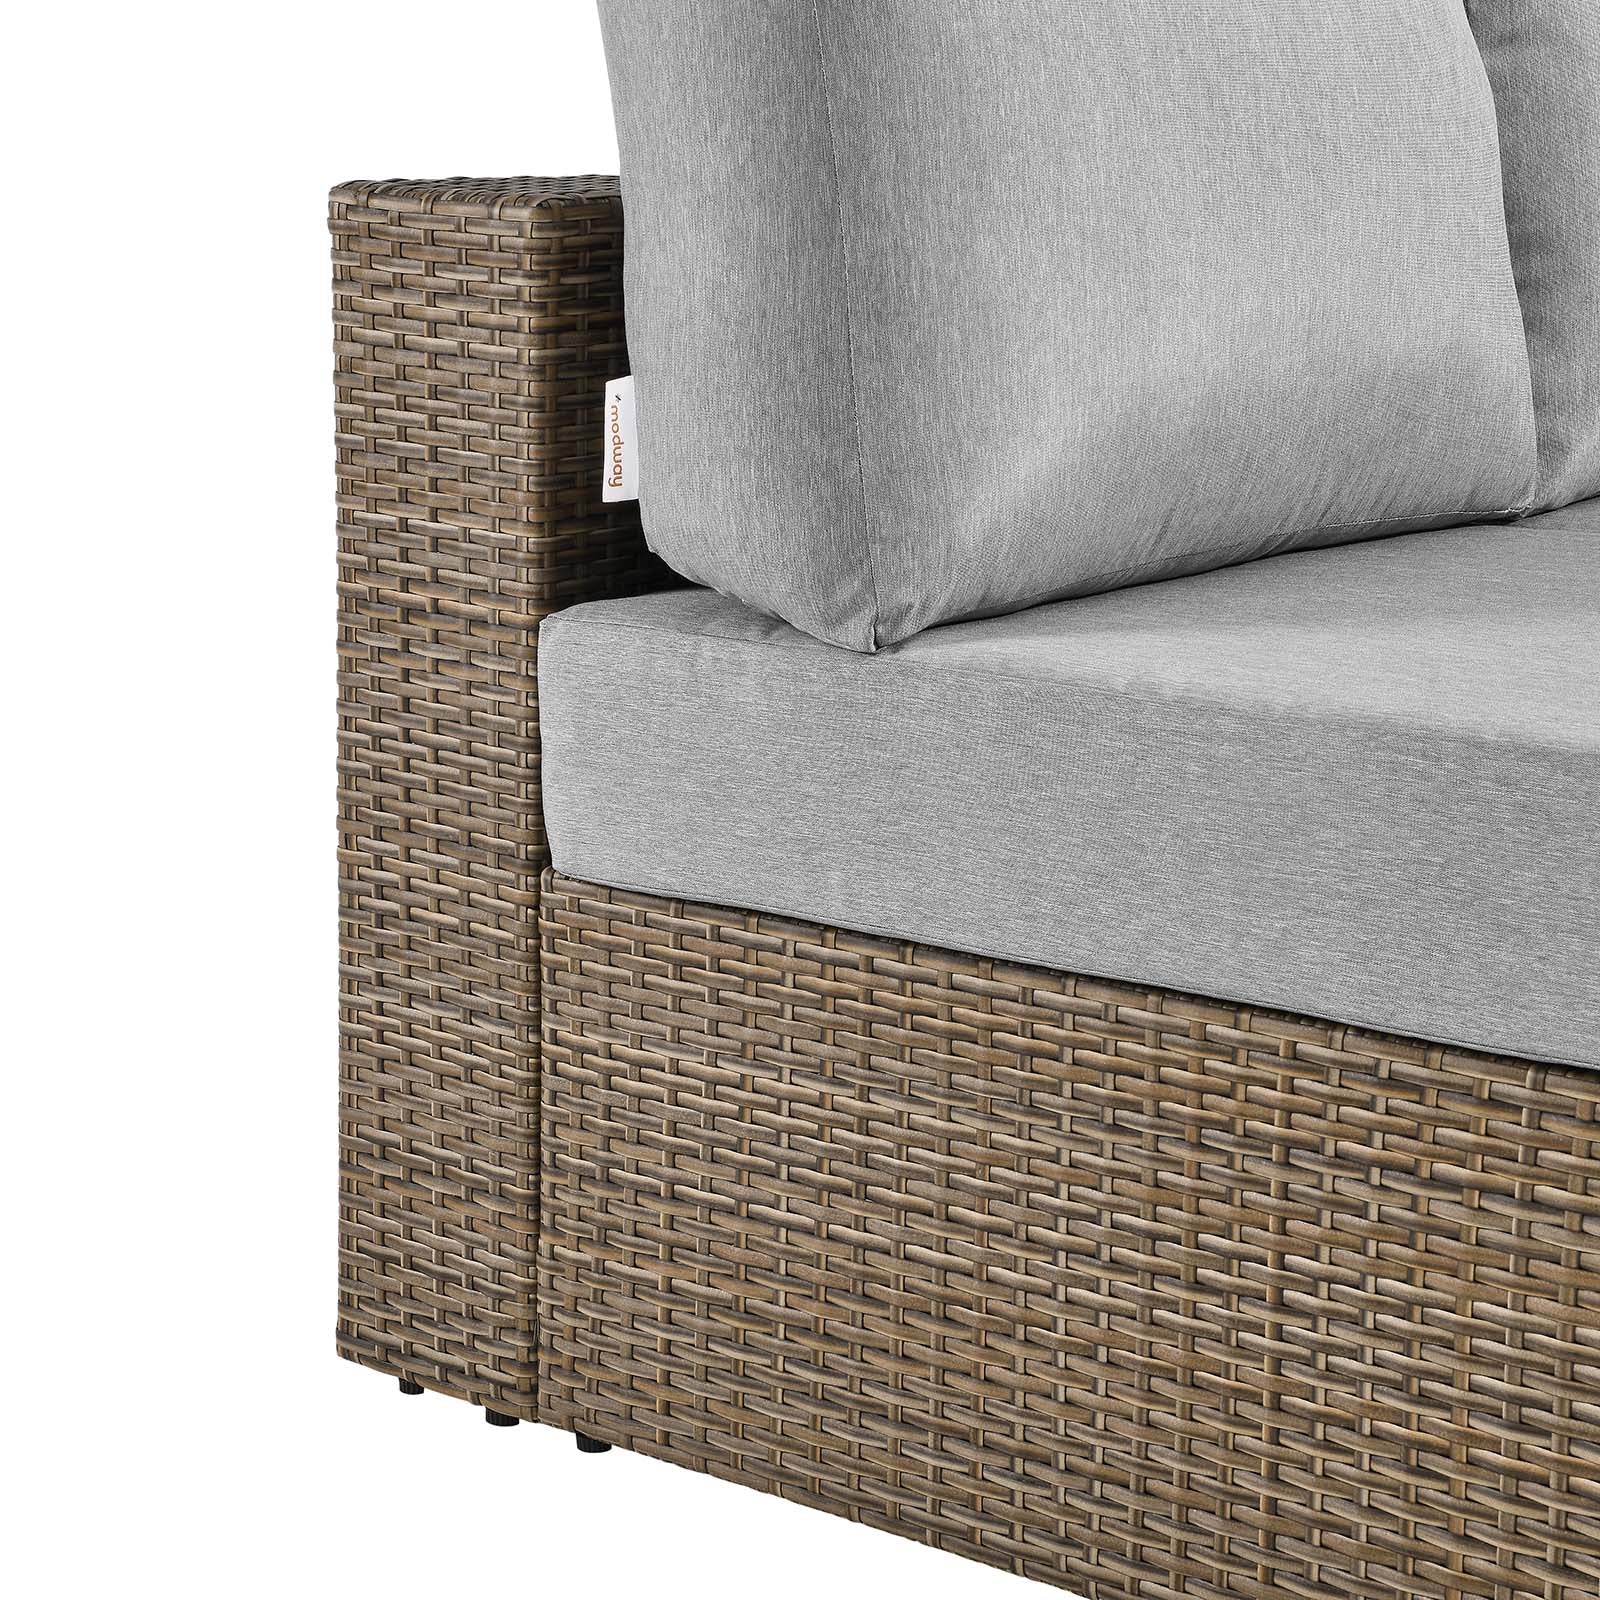 Convene Outdoor Patio Outdoor Patio Right-Arm Loveseat - East Shore Modern Home Furnishings